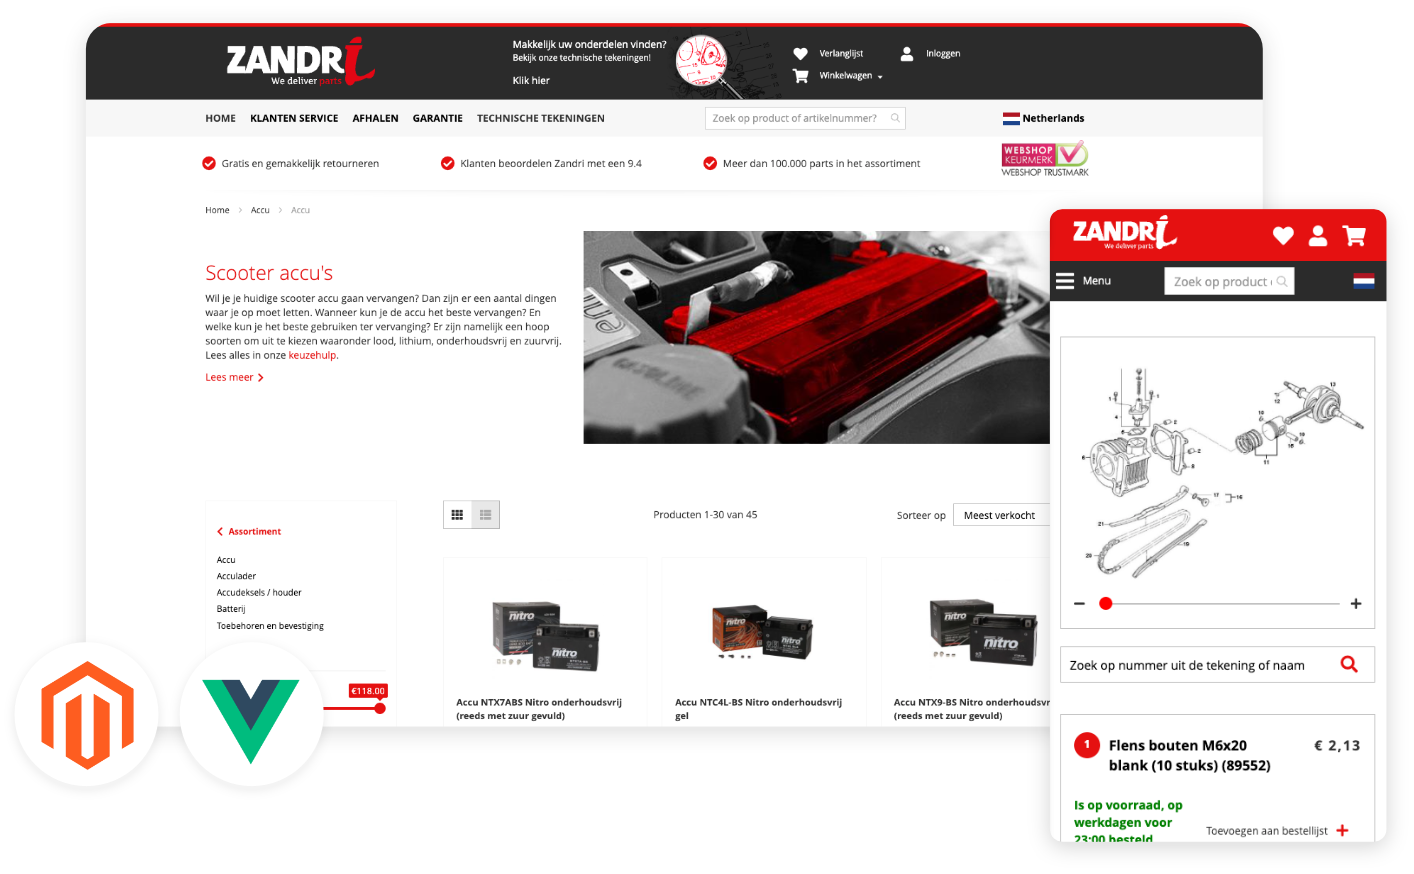 Casestudy: Zandri market leader in parts for moped and scooters